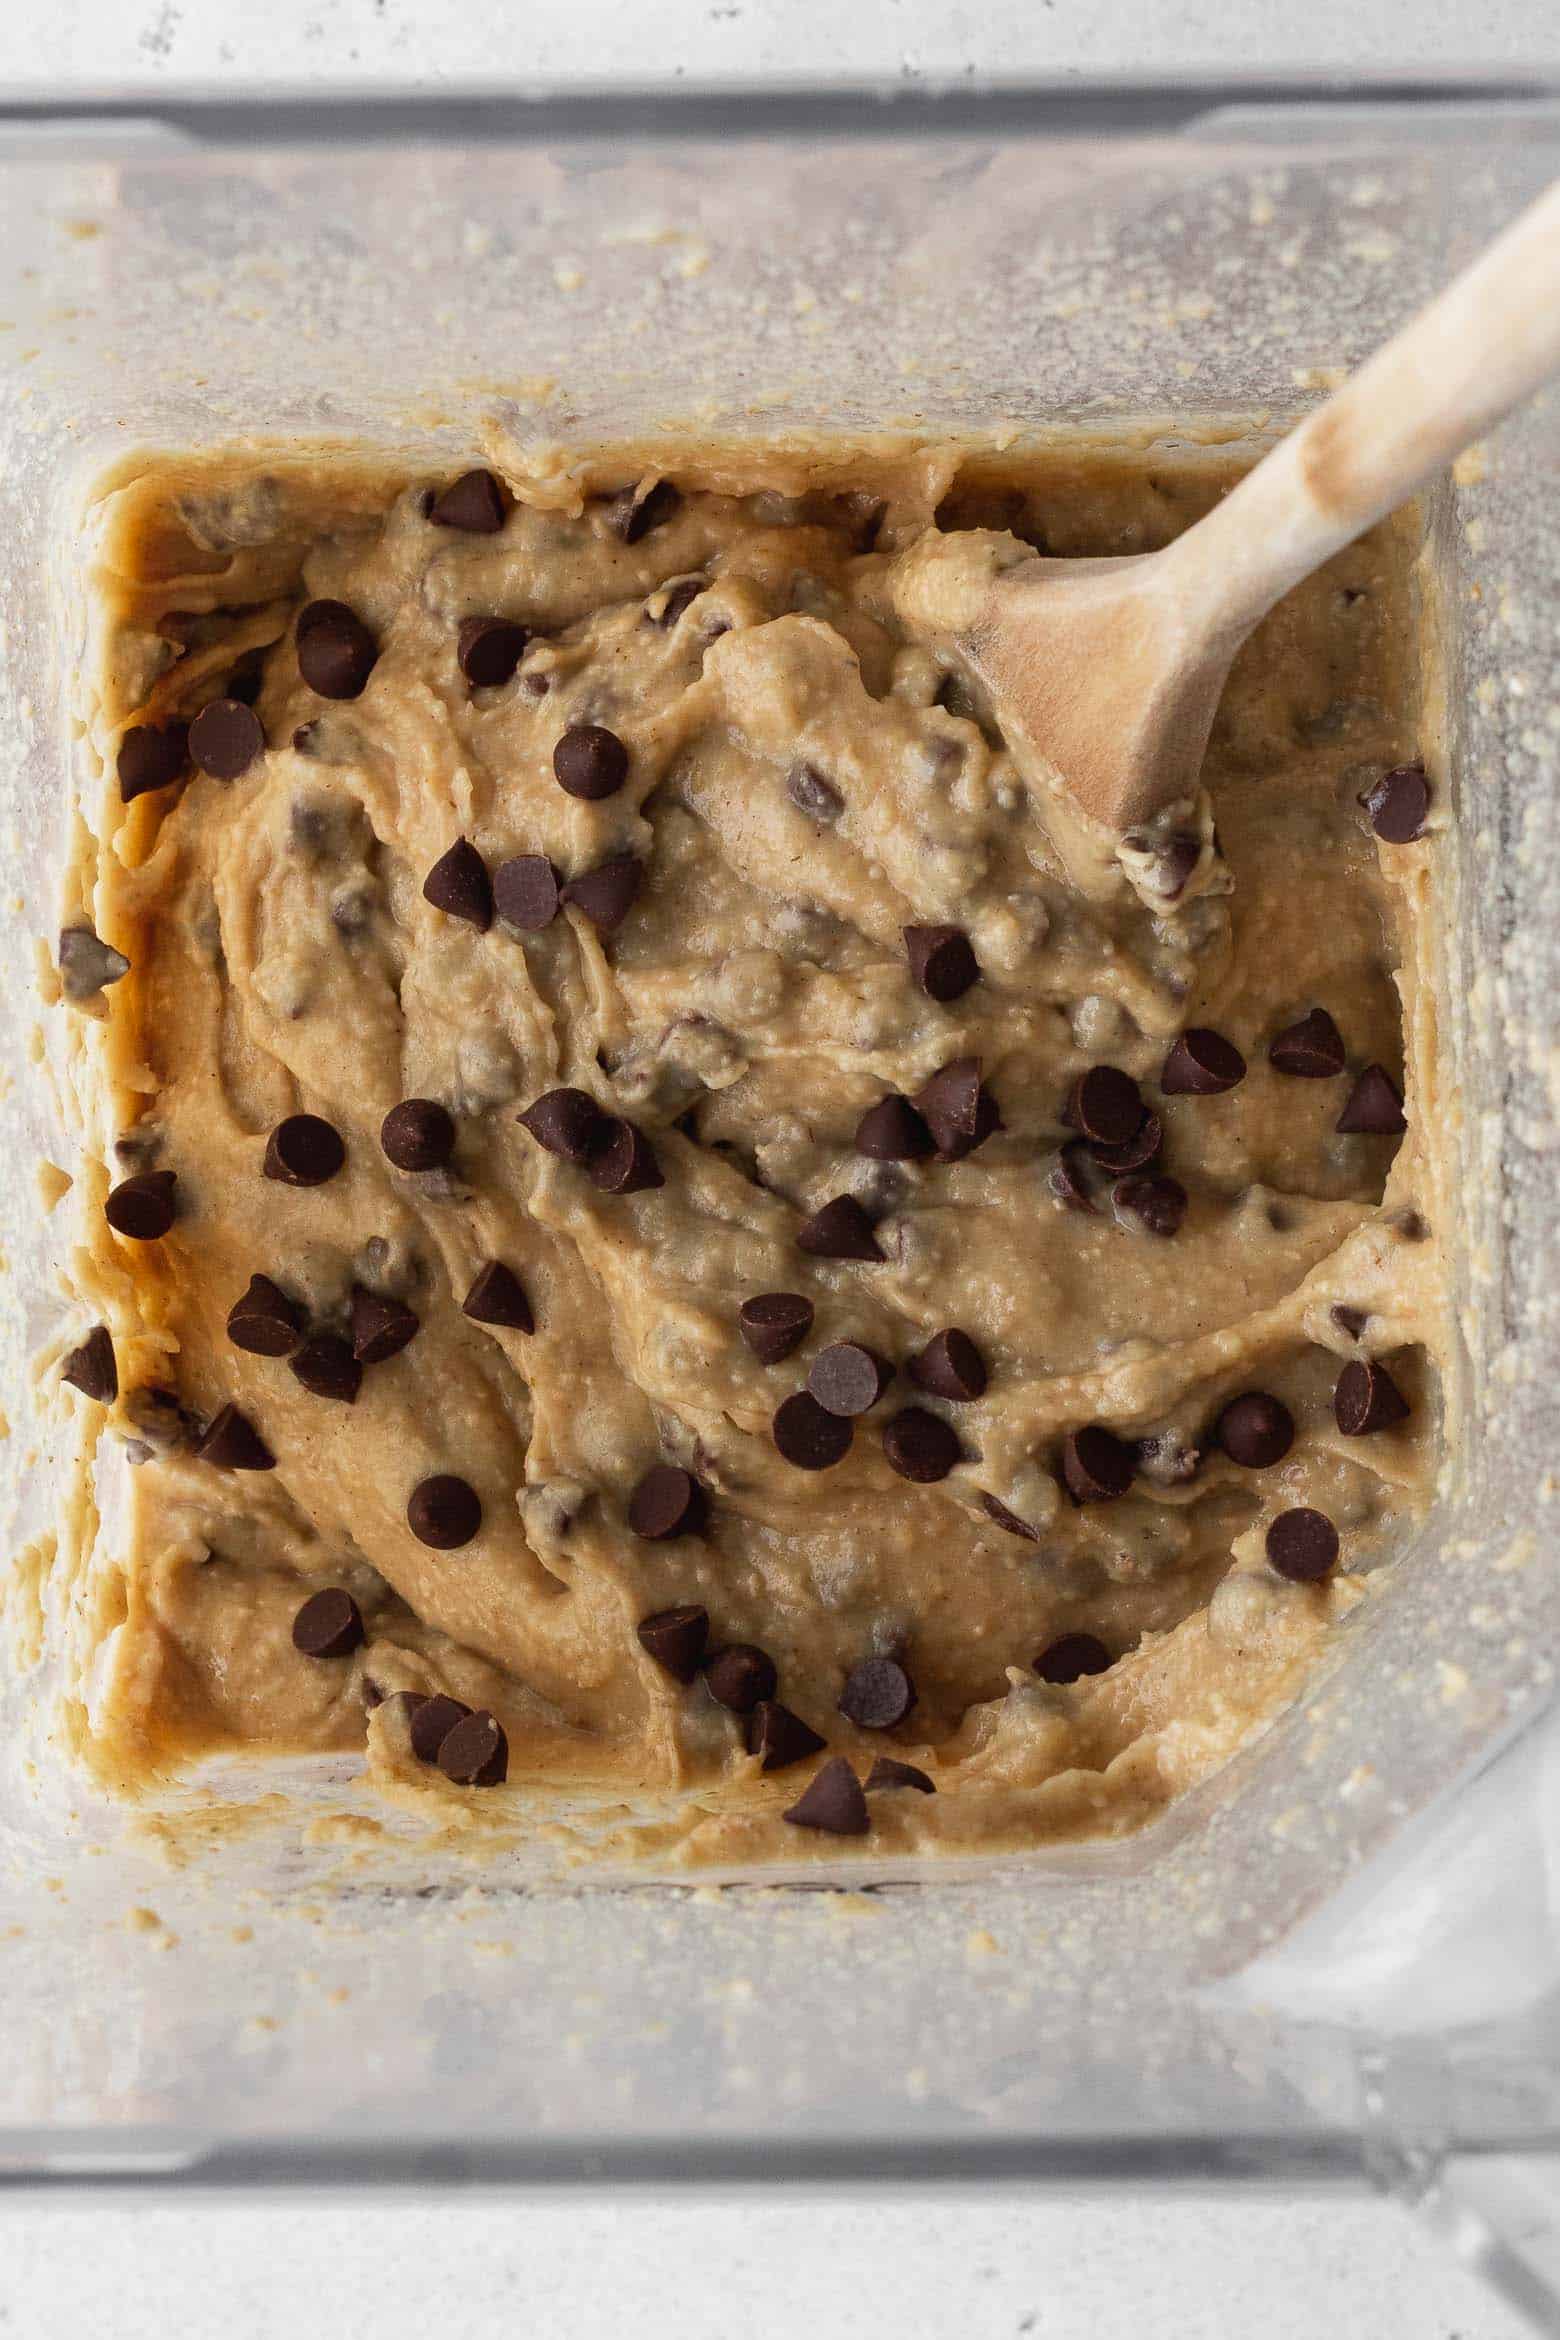 Chocolate chip chickpea cookie dough in a blender